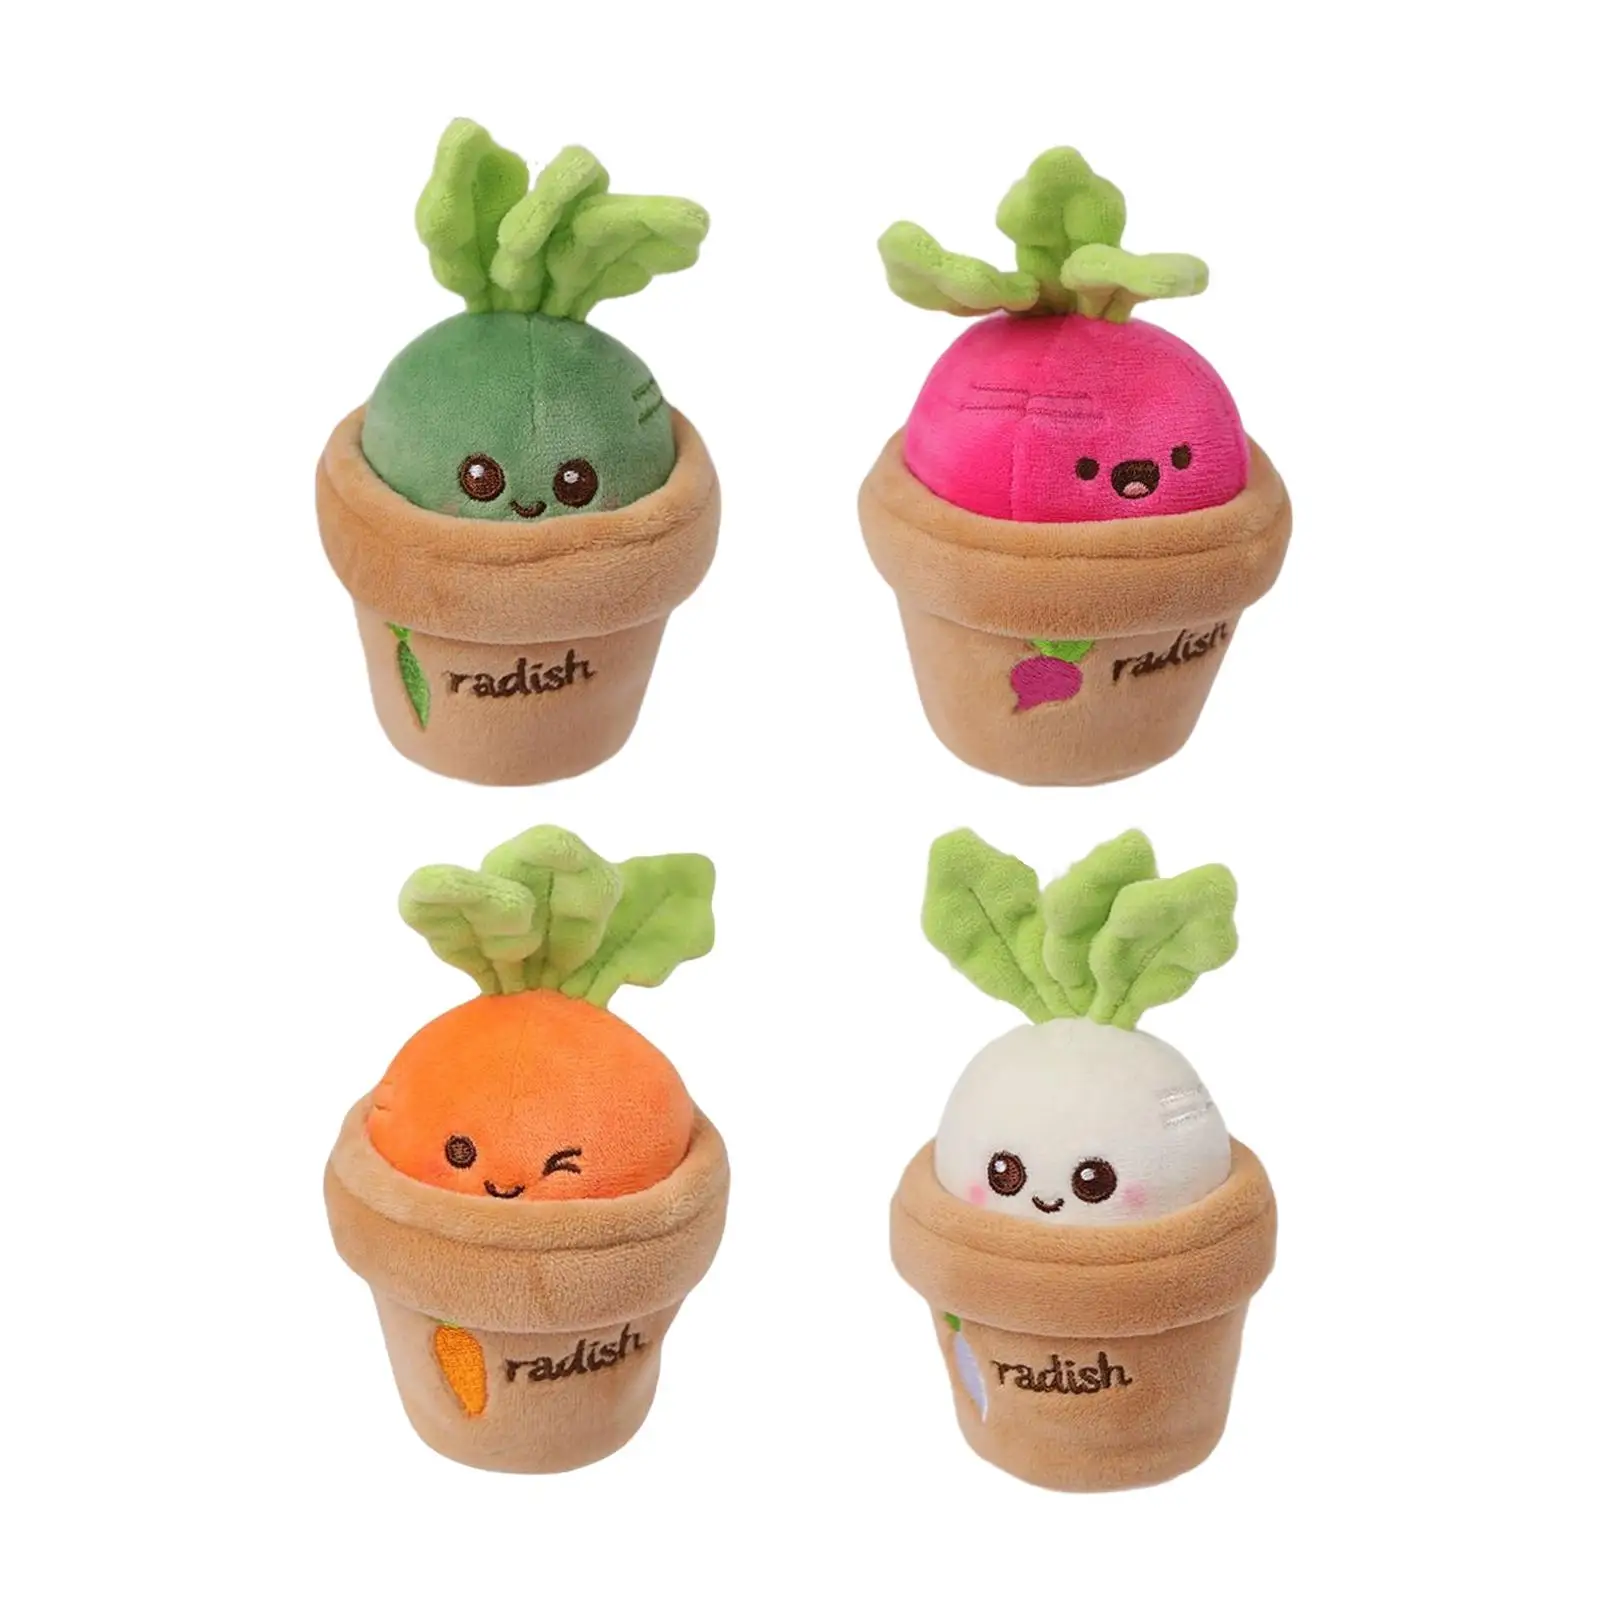 Carrot Plush Toy Keyrings Funny Vegetable Play Stuffed Soft Plush Doll Figure Toy for Kids Room Children Home Birthday Gifts